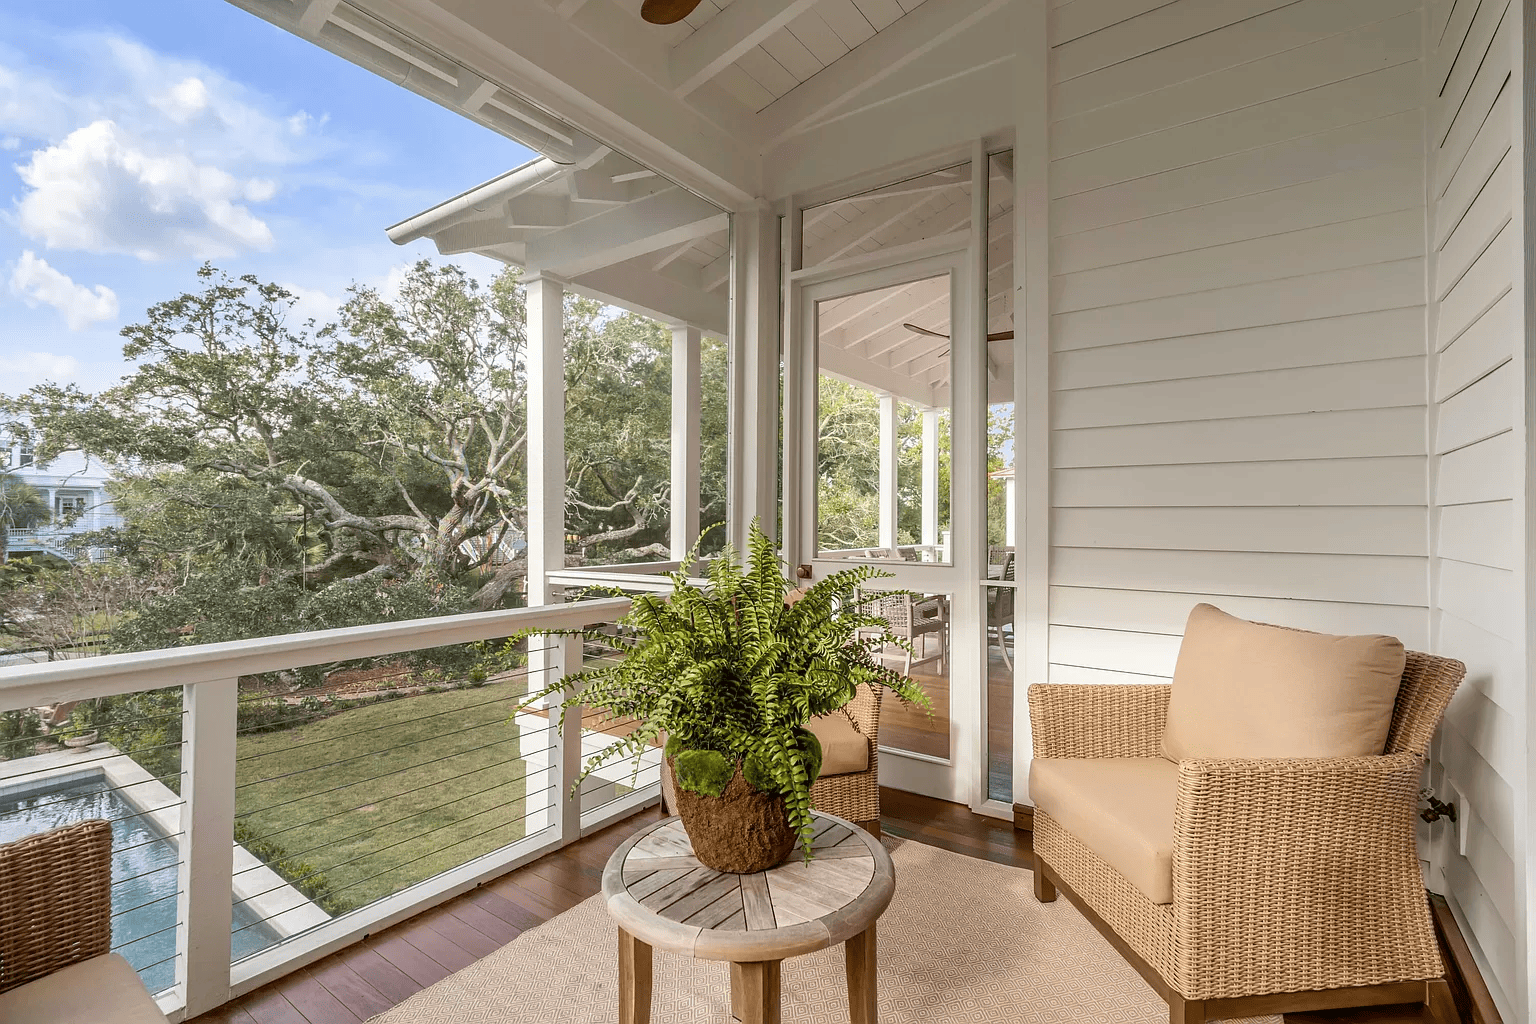 Home tour featuring Charleston Harbor home traditional porch